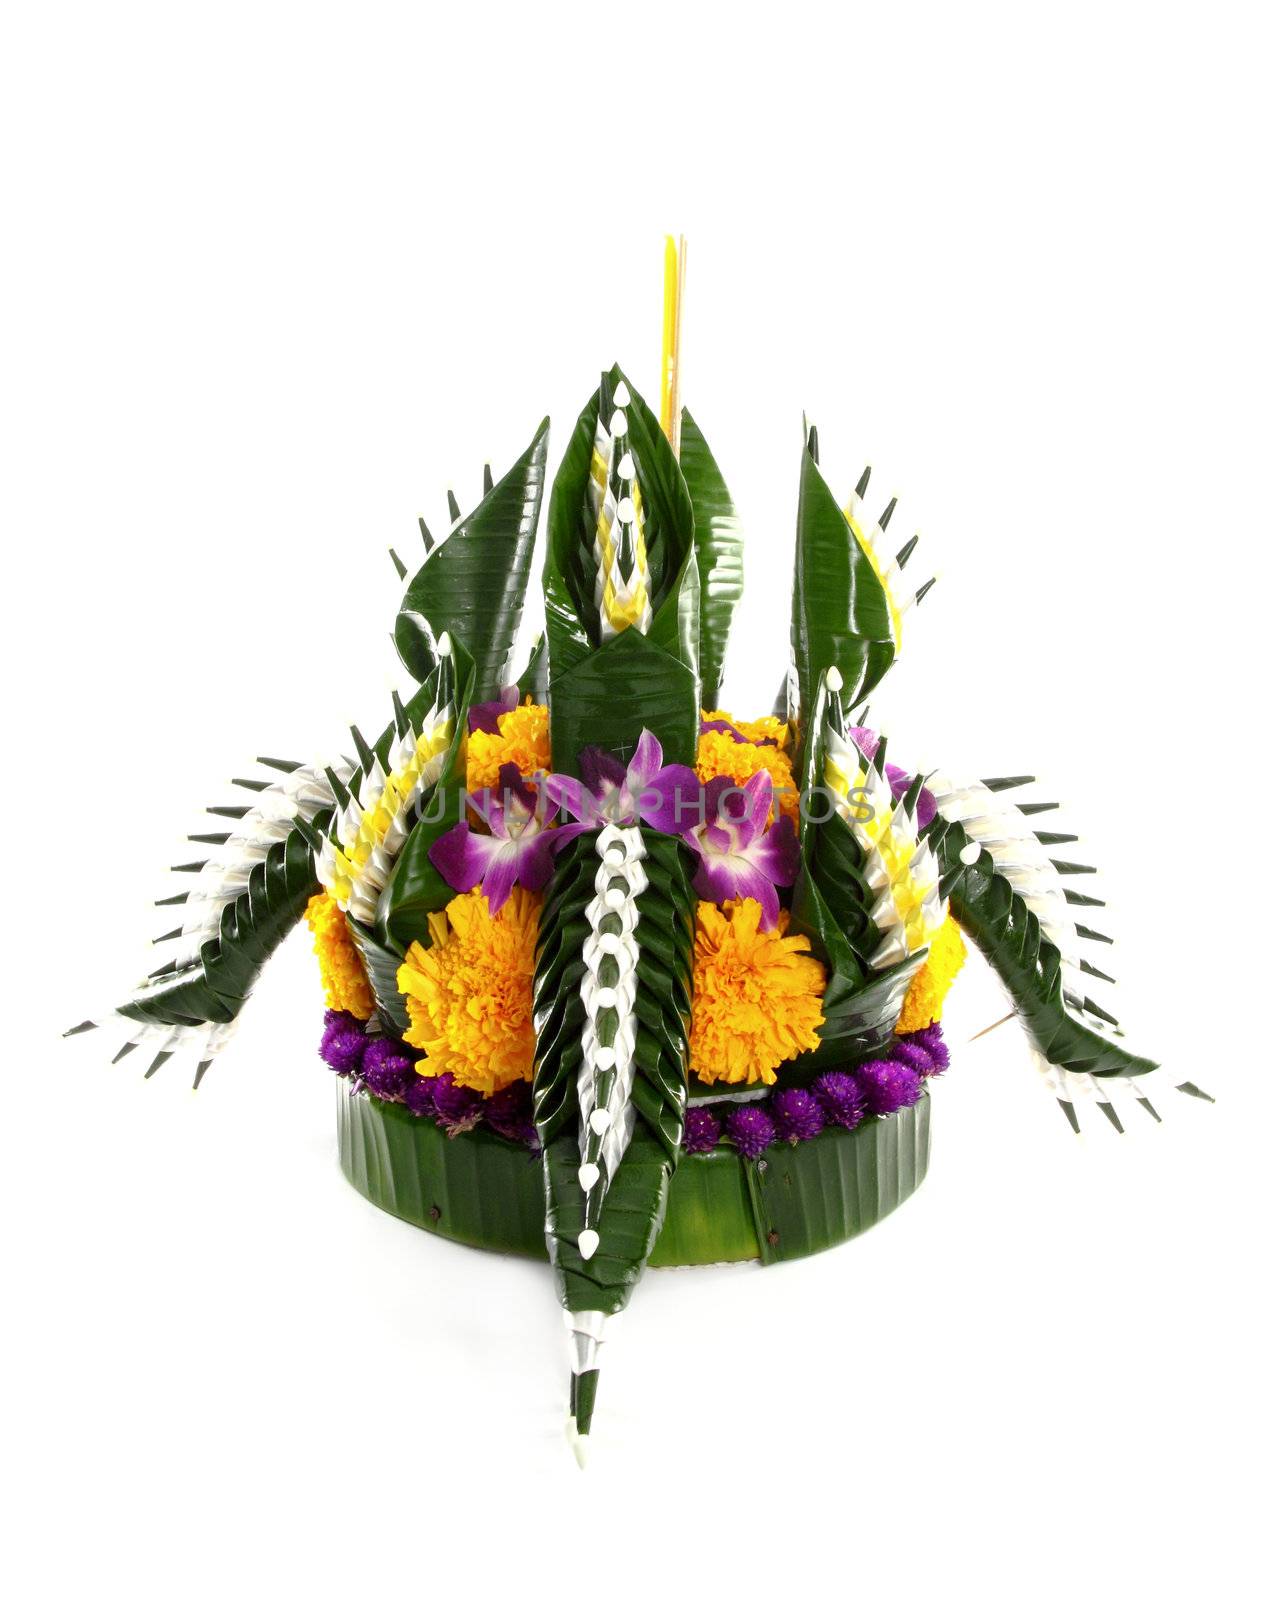 Loy kratong Festival in Thailand, on white background by geargodz